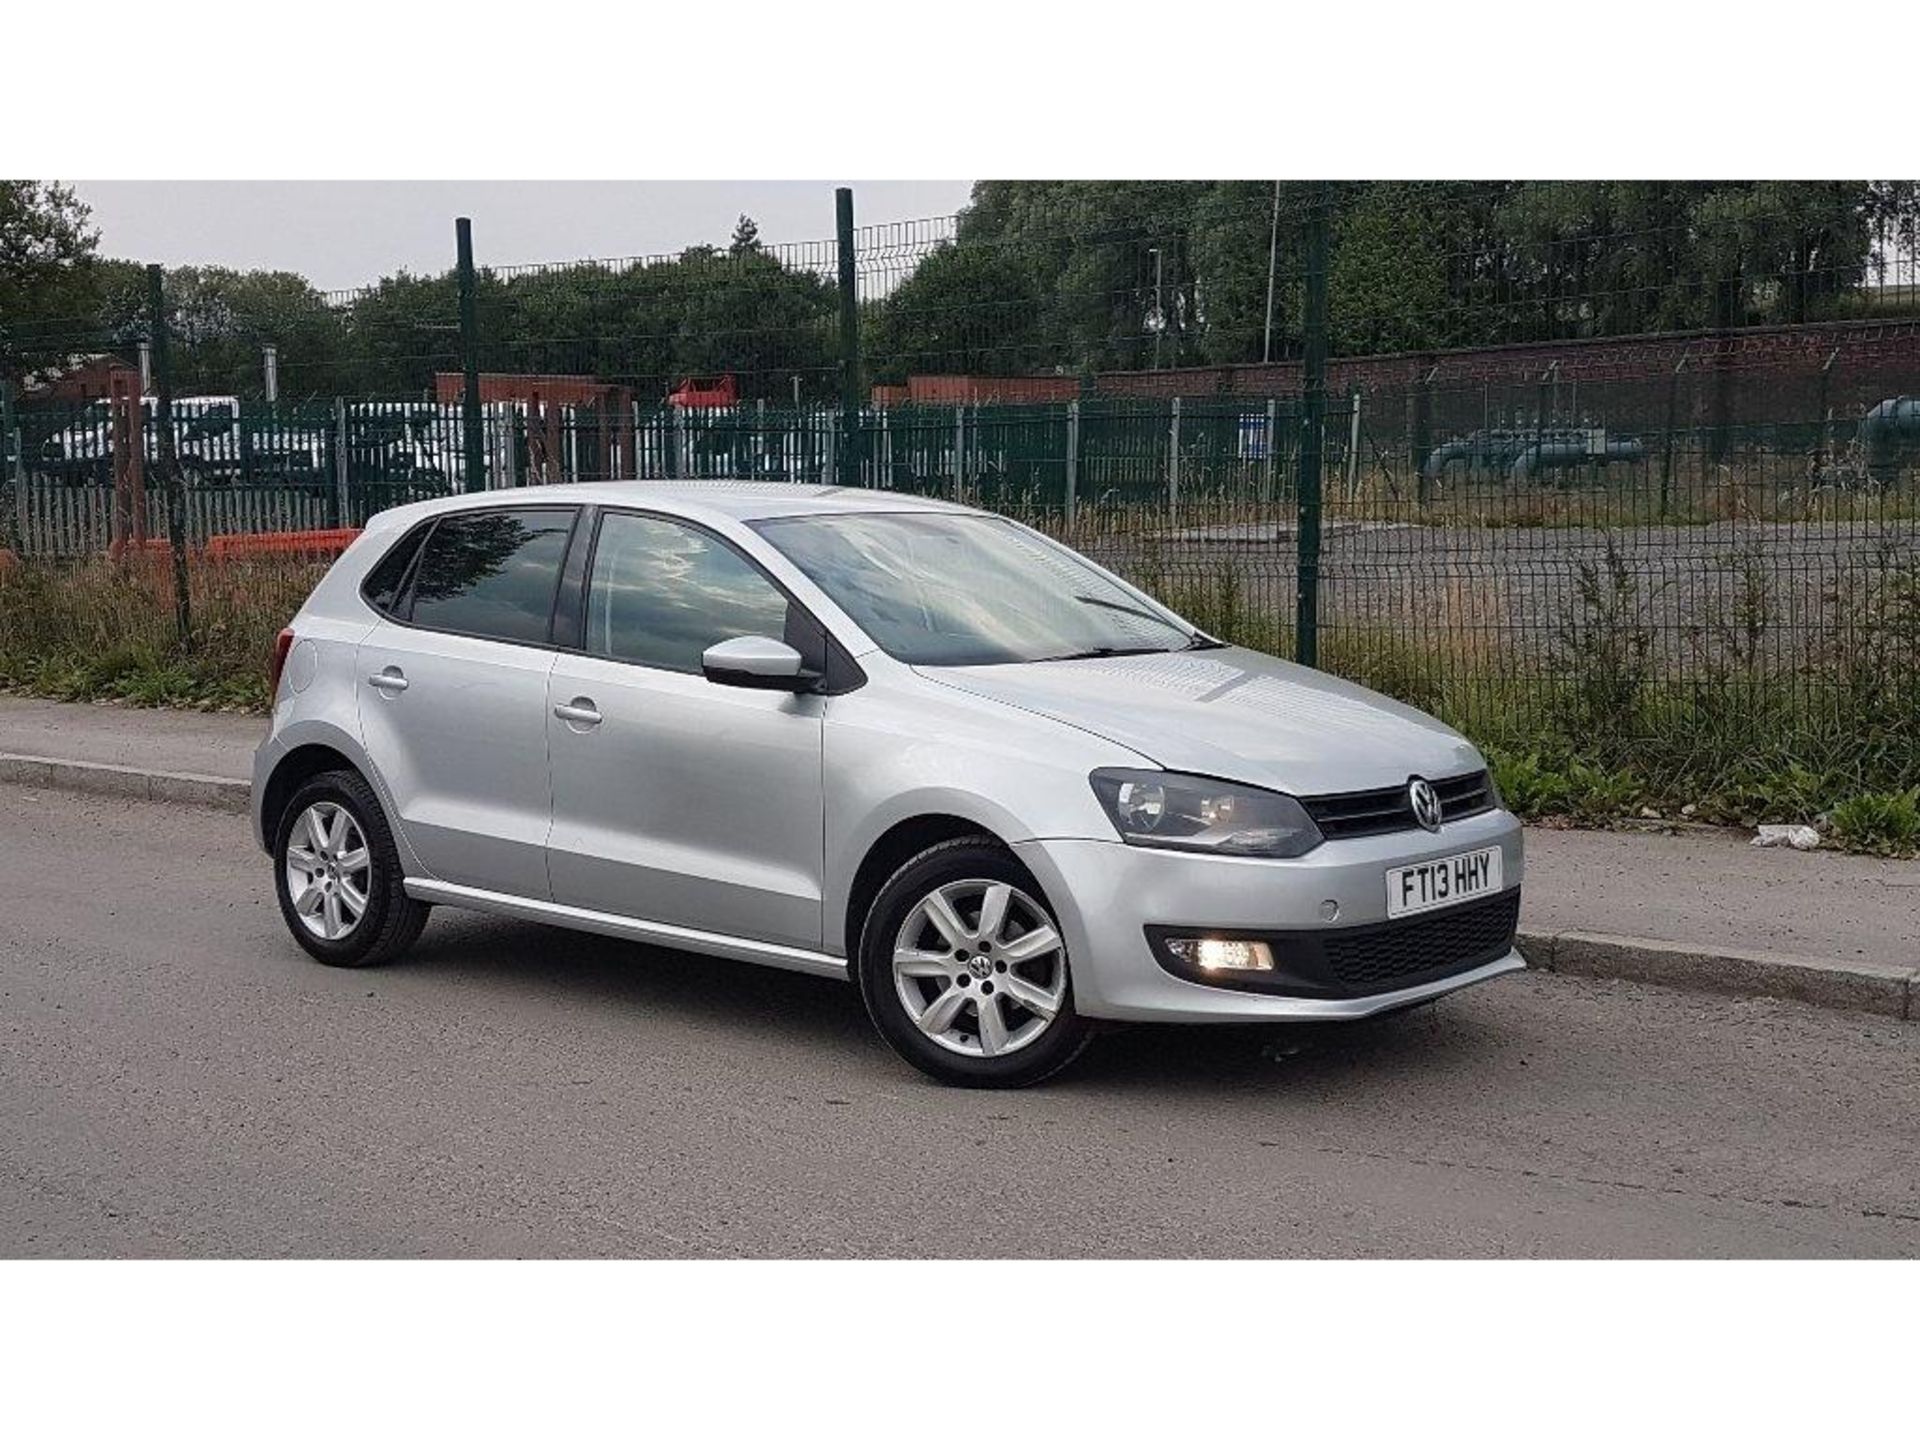 VOLKSWAGEN POLO 1.2 MATCH EDITION 5DR, FT13 HHY, 20.05.2013, PETROL, MILEAGE 28,499, MANUAL, 1.2L, 2 - Image 17 of 19